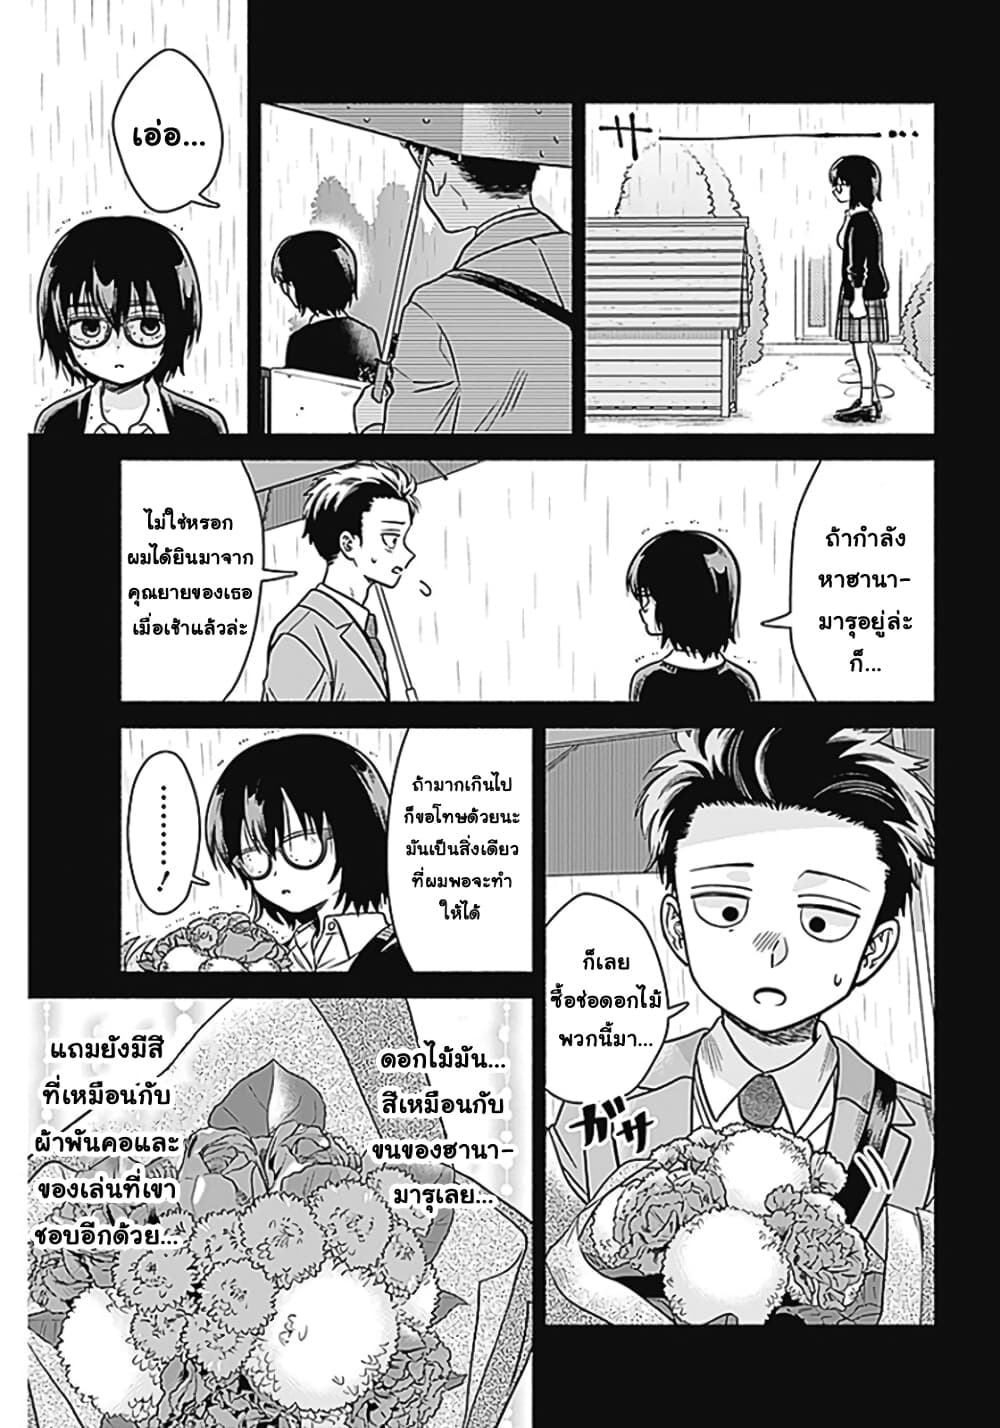 Marriage Gray 2 (7)